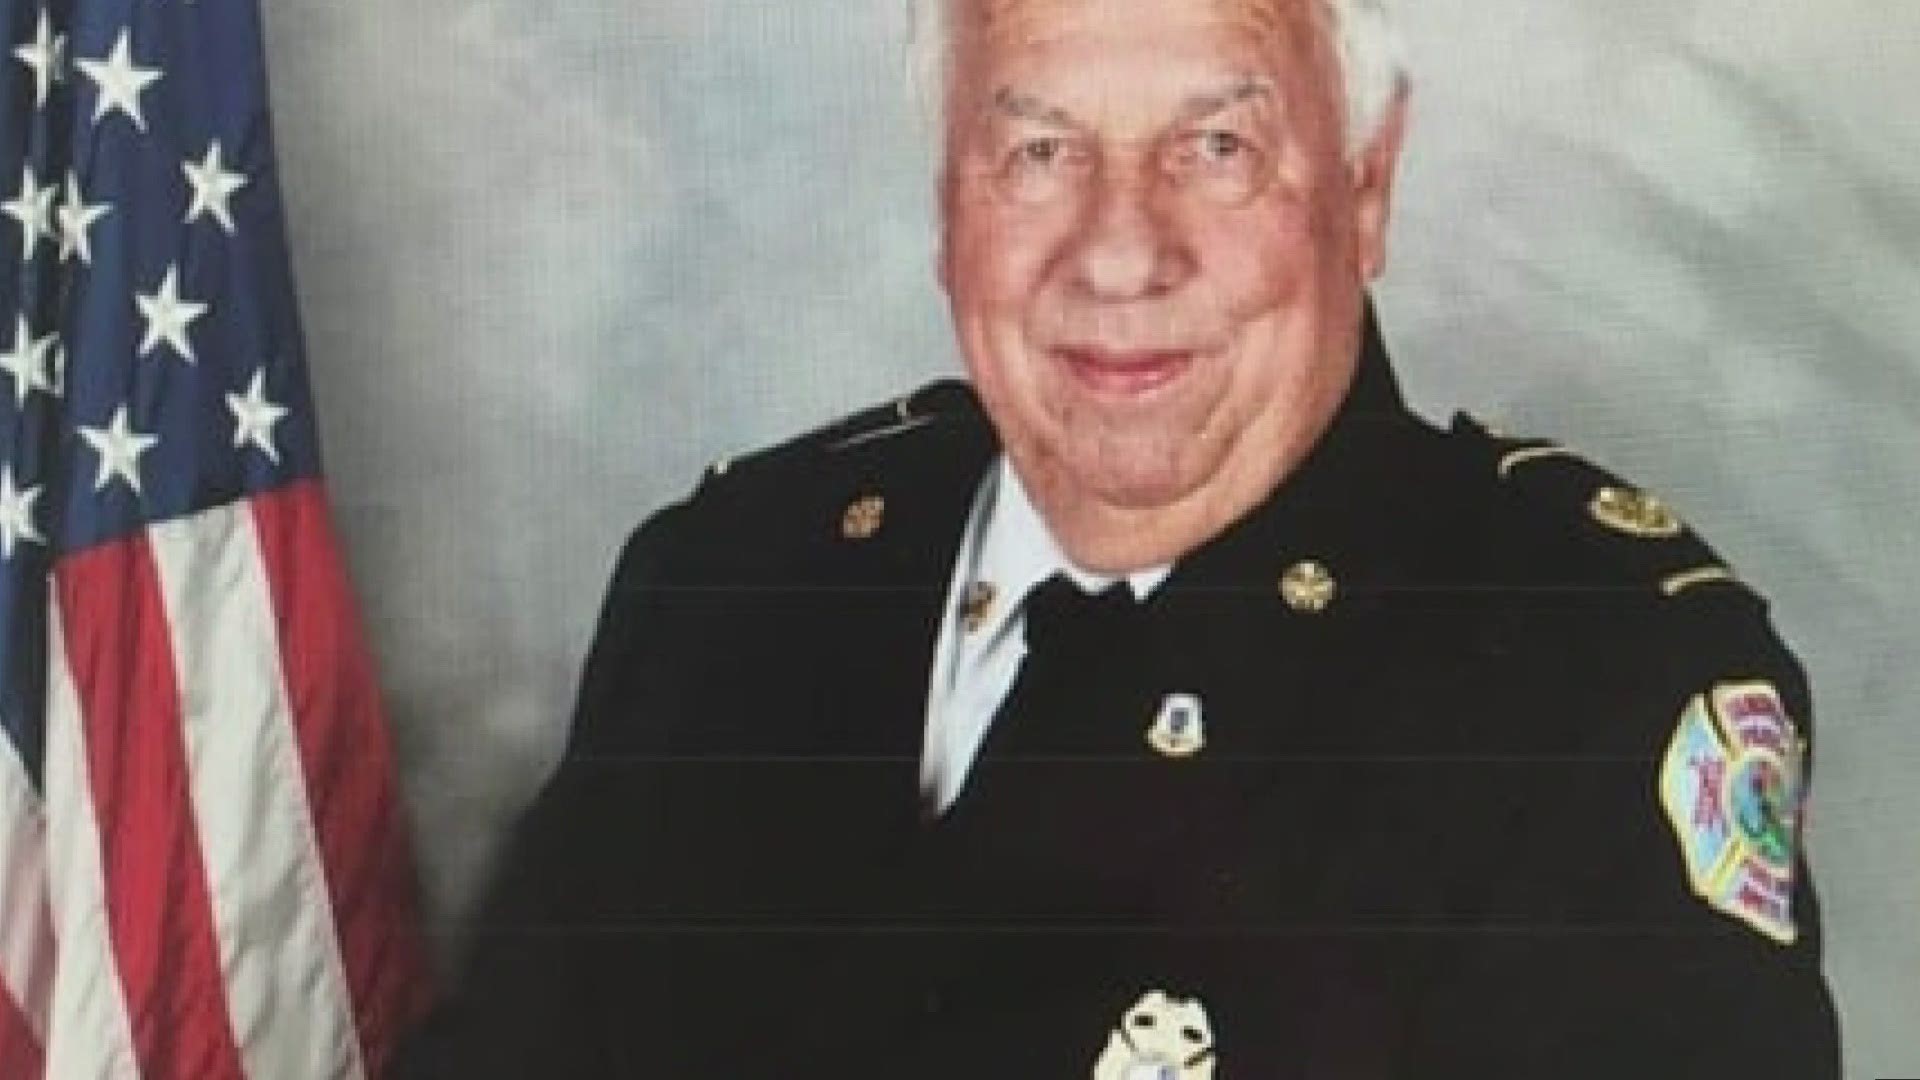 Amite Fire Chief Bruce Cutrer died this week from complications of COVID-19. His loss has shaken leaders in Tangipahoa.